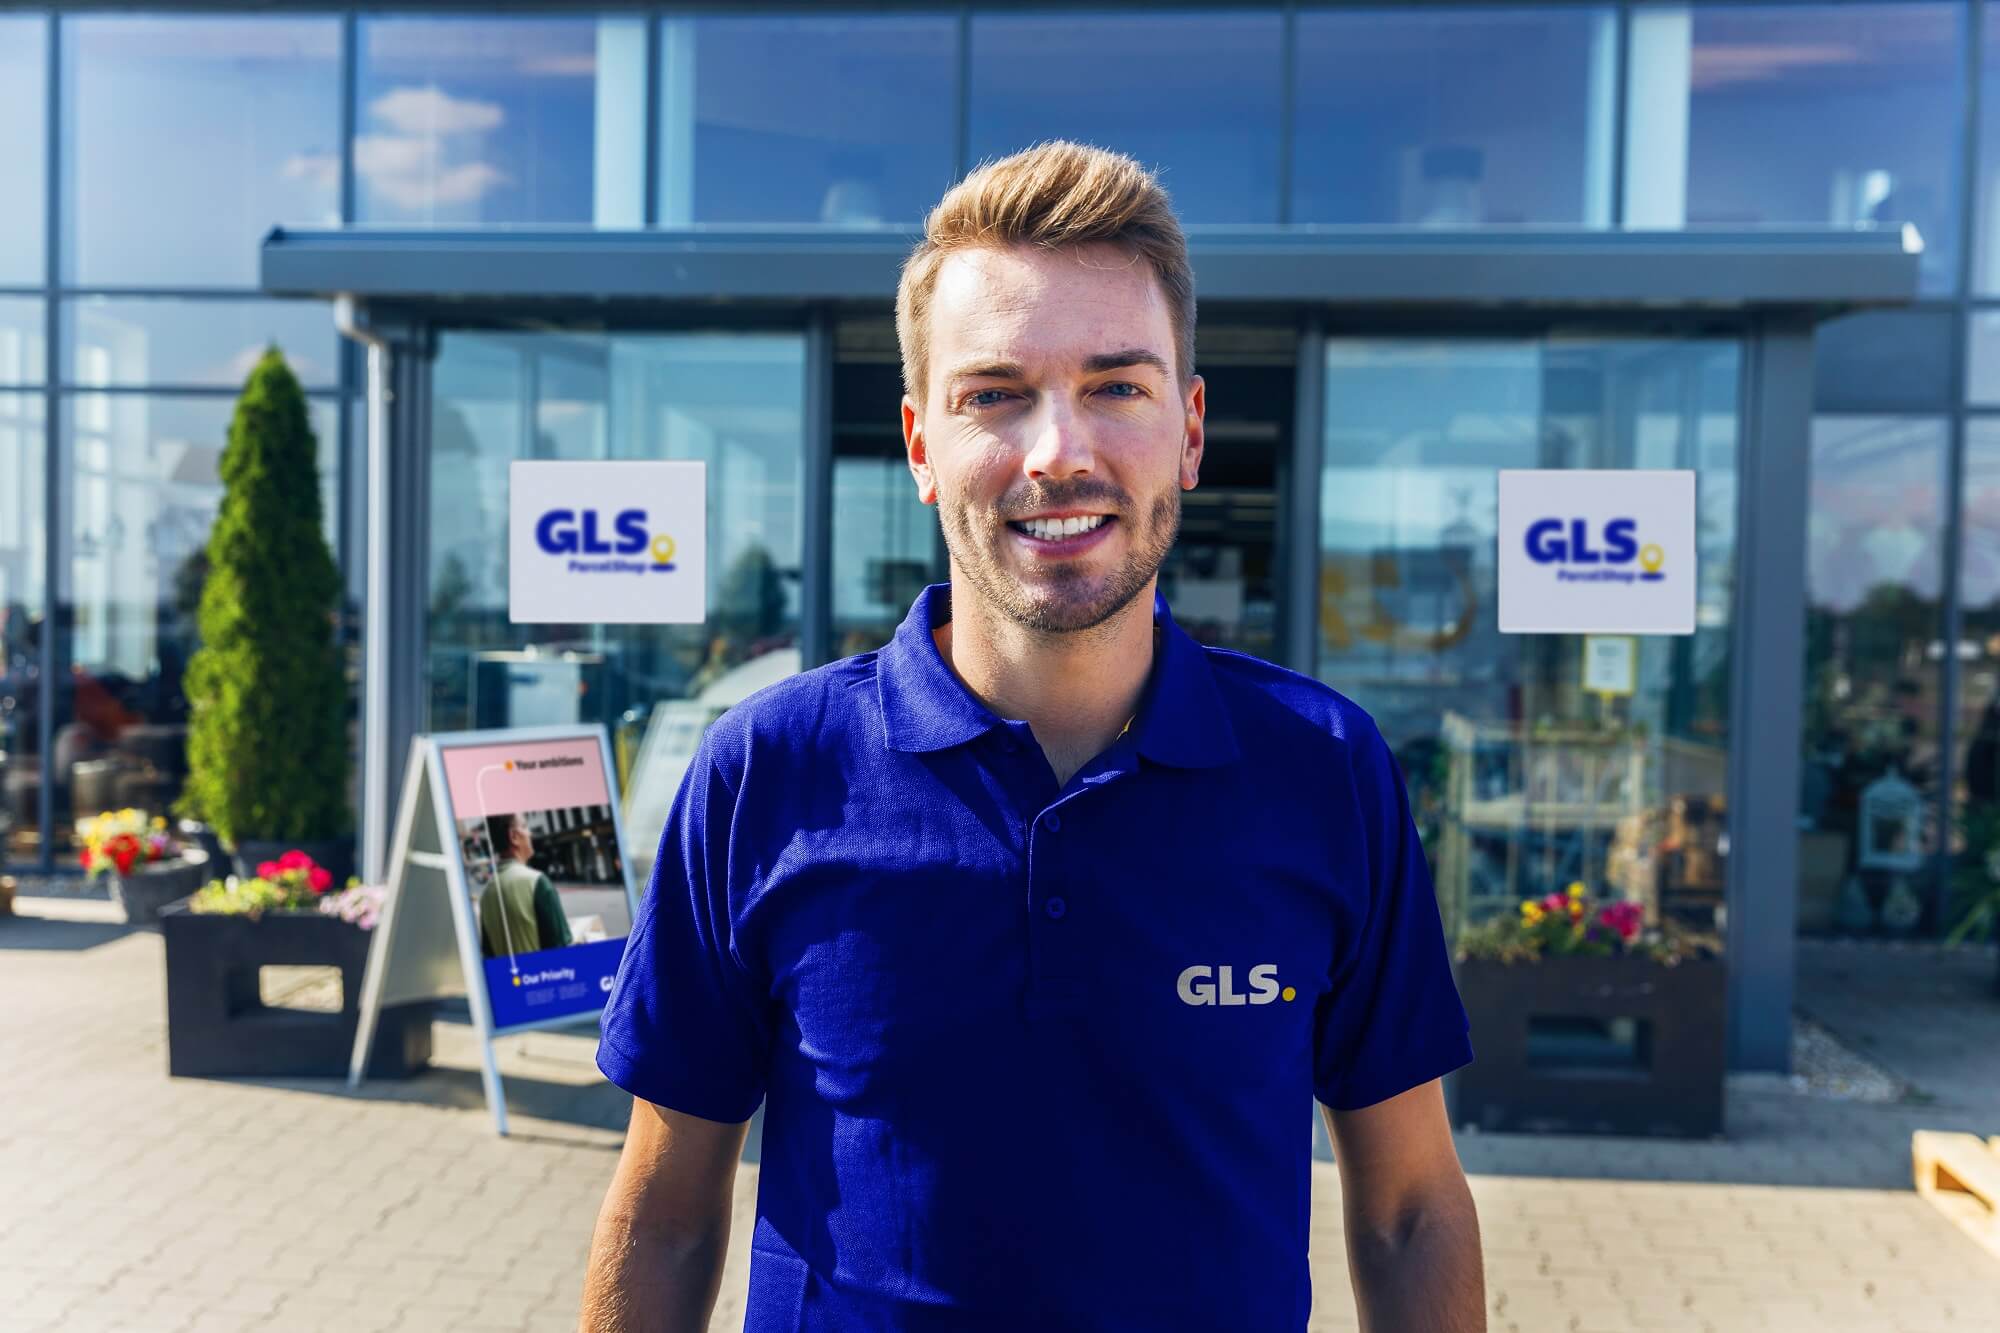 A GLS employee stands in front of a garden center that acts as a GLS parcel shop 